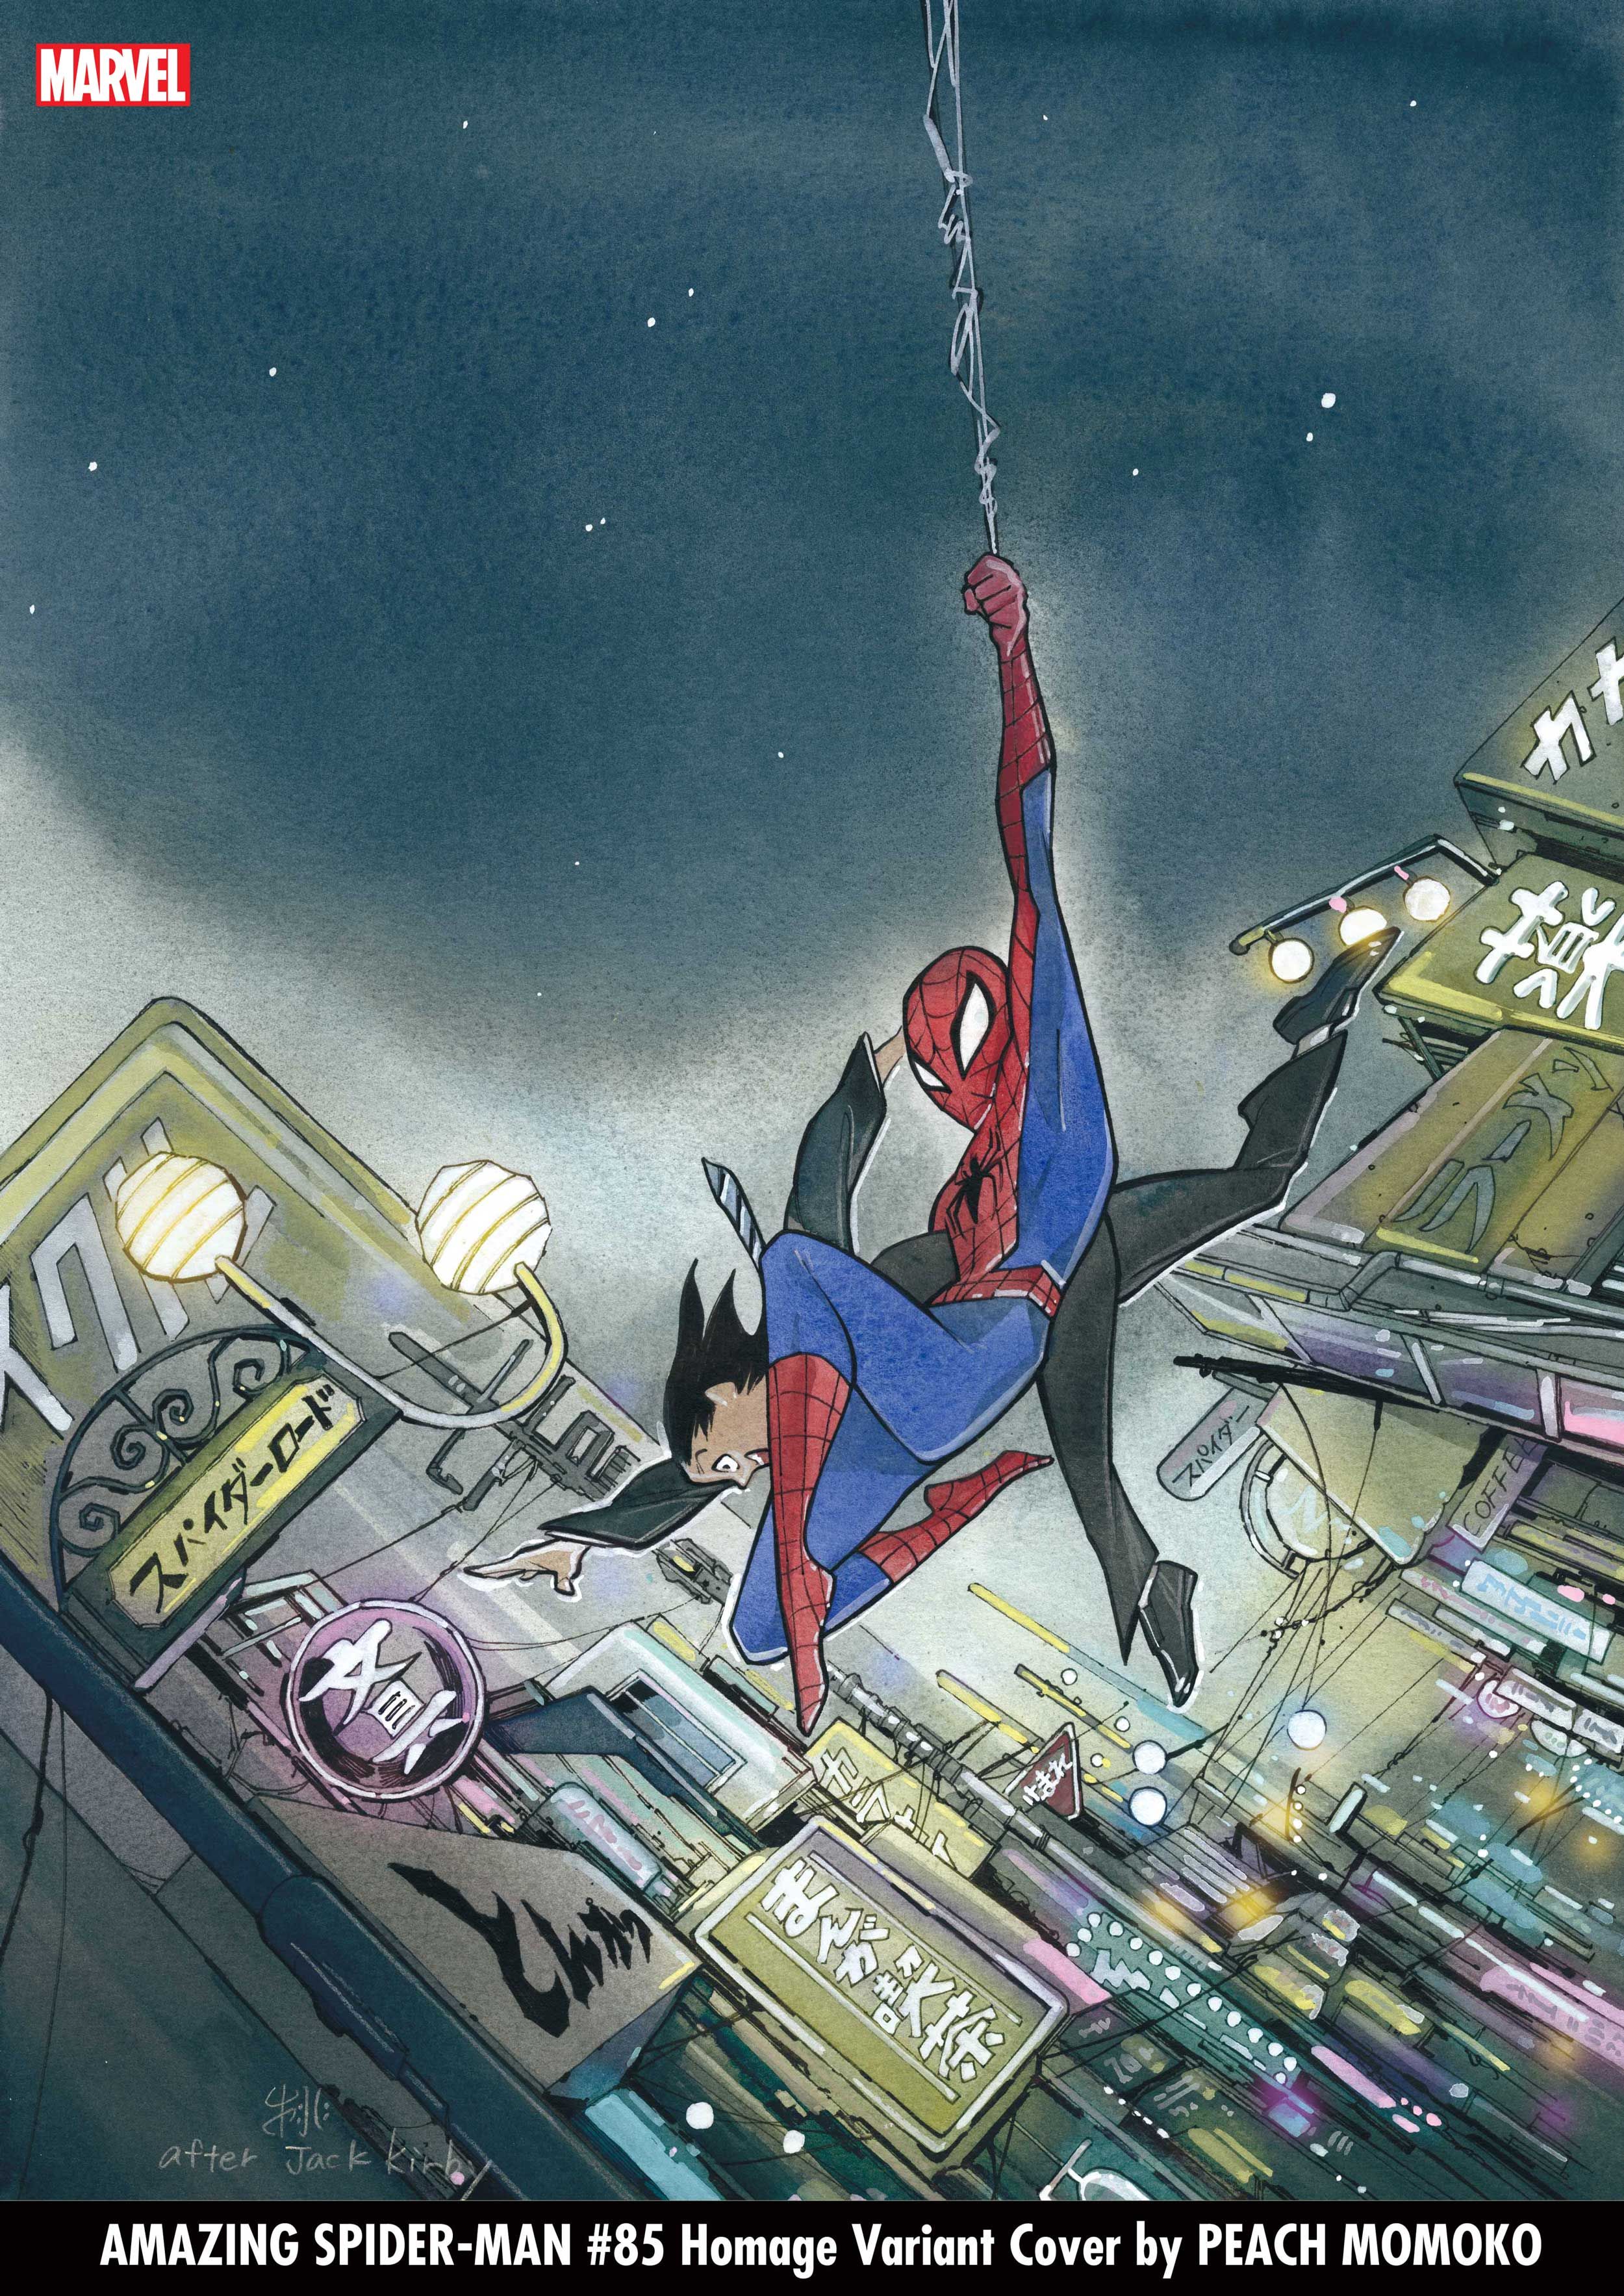 Peach Momoko's Homage Variant Cover for Amazing Spider-Man #85